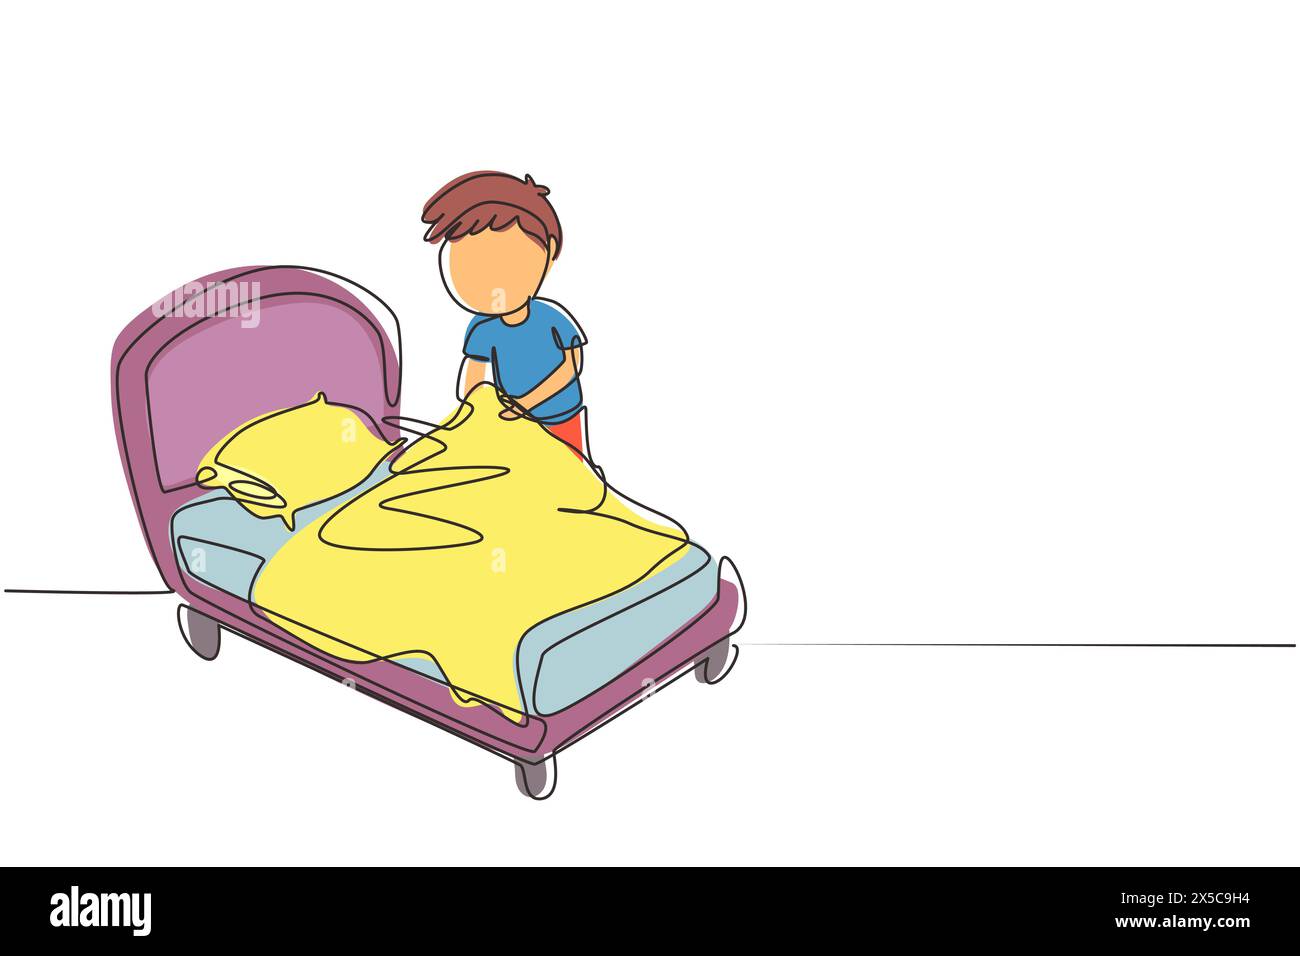 Single continuous line drawing little boy making the bed. Kids doing housework chores at home concept. Kids routine after waking up to tidy up the bed Stock Vector